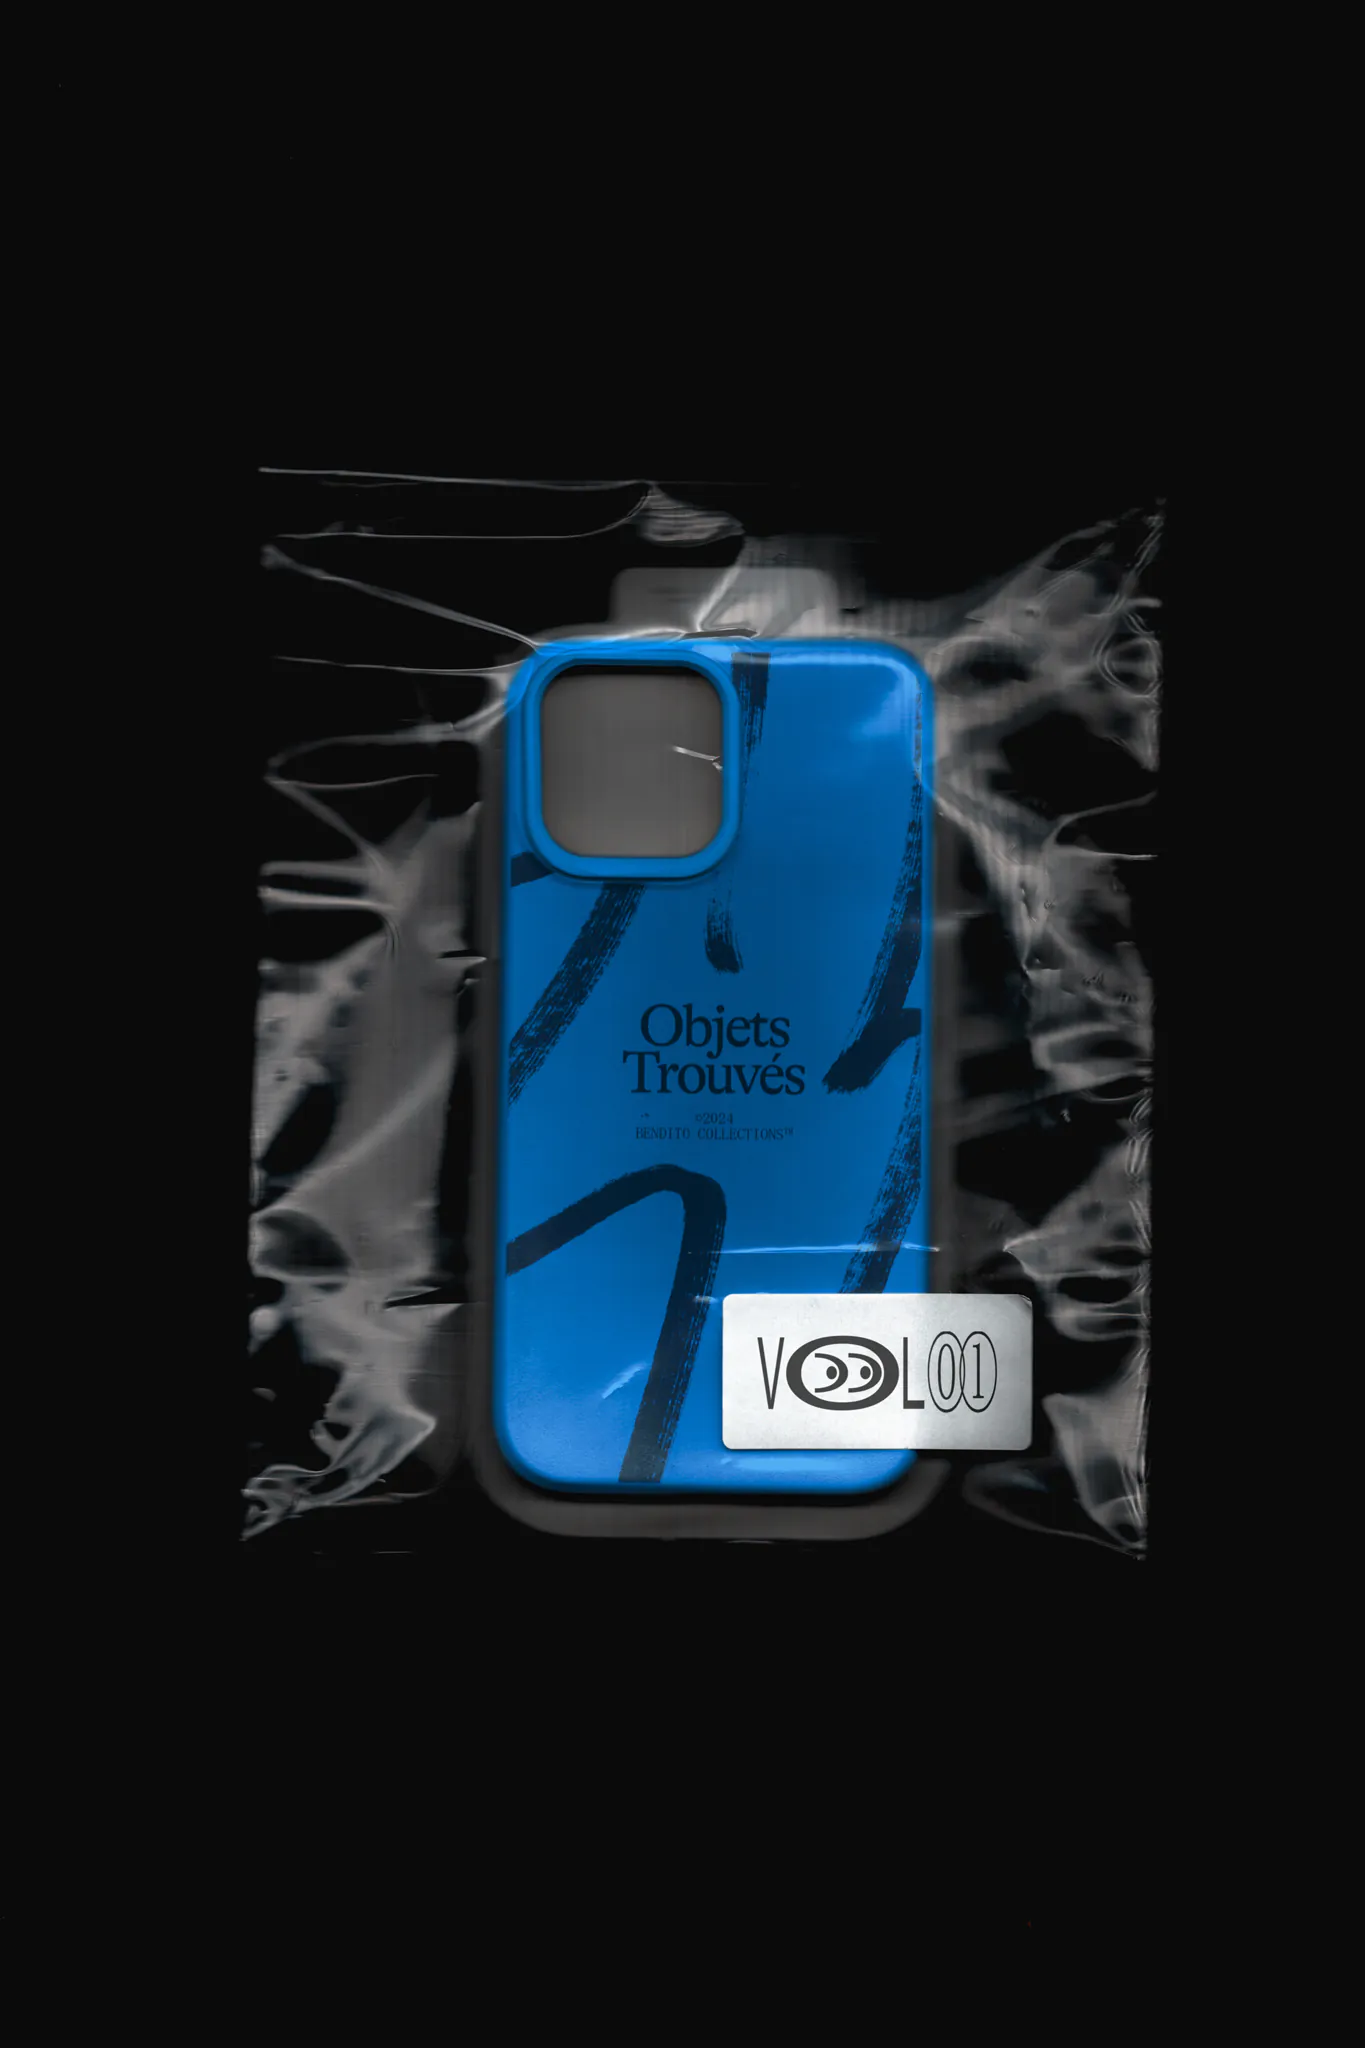 High-quality iPhone case mockup with a sticker inside enclosed in plastic bag. Scanned effect iPhone case mockup inside of a plastic bag. High quality mockup for Adobe Photoshop.